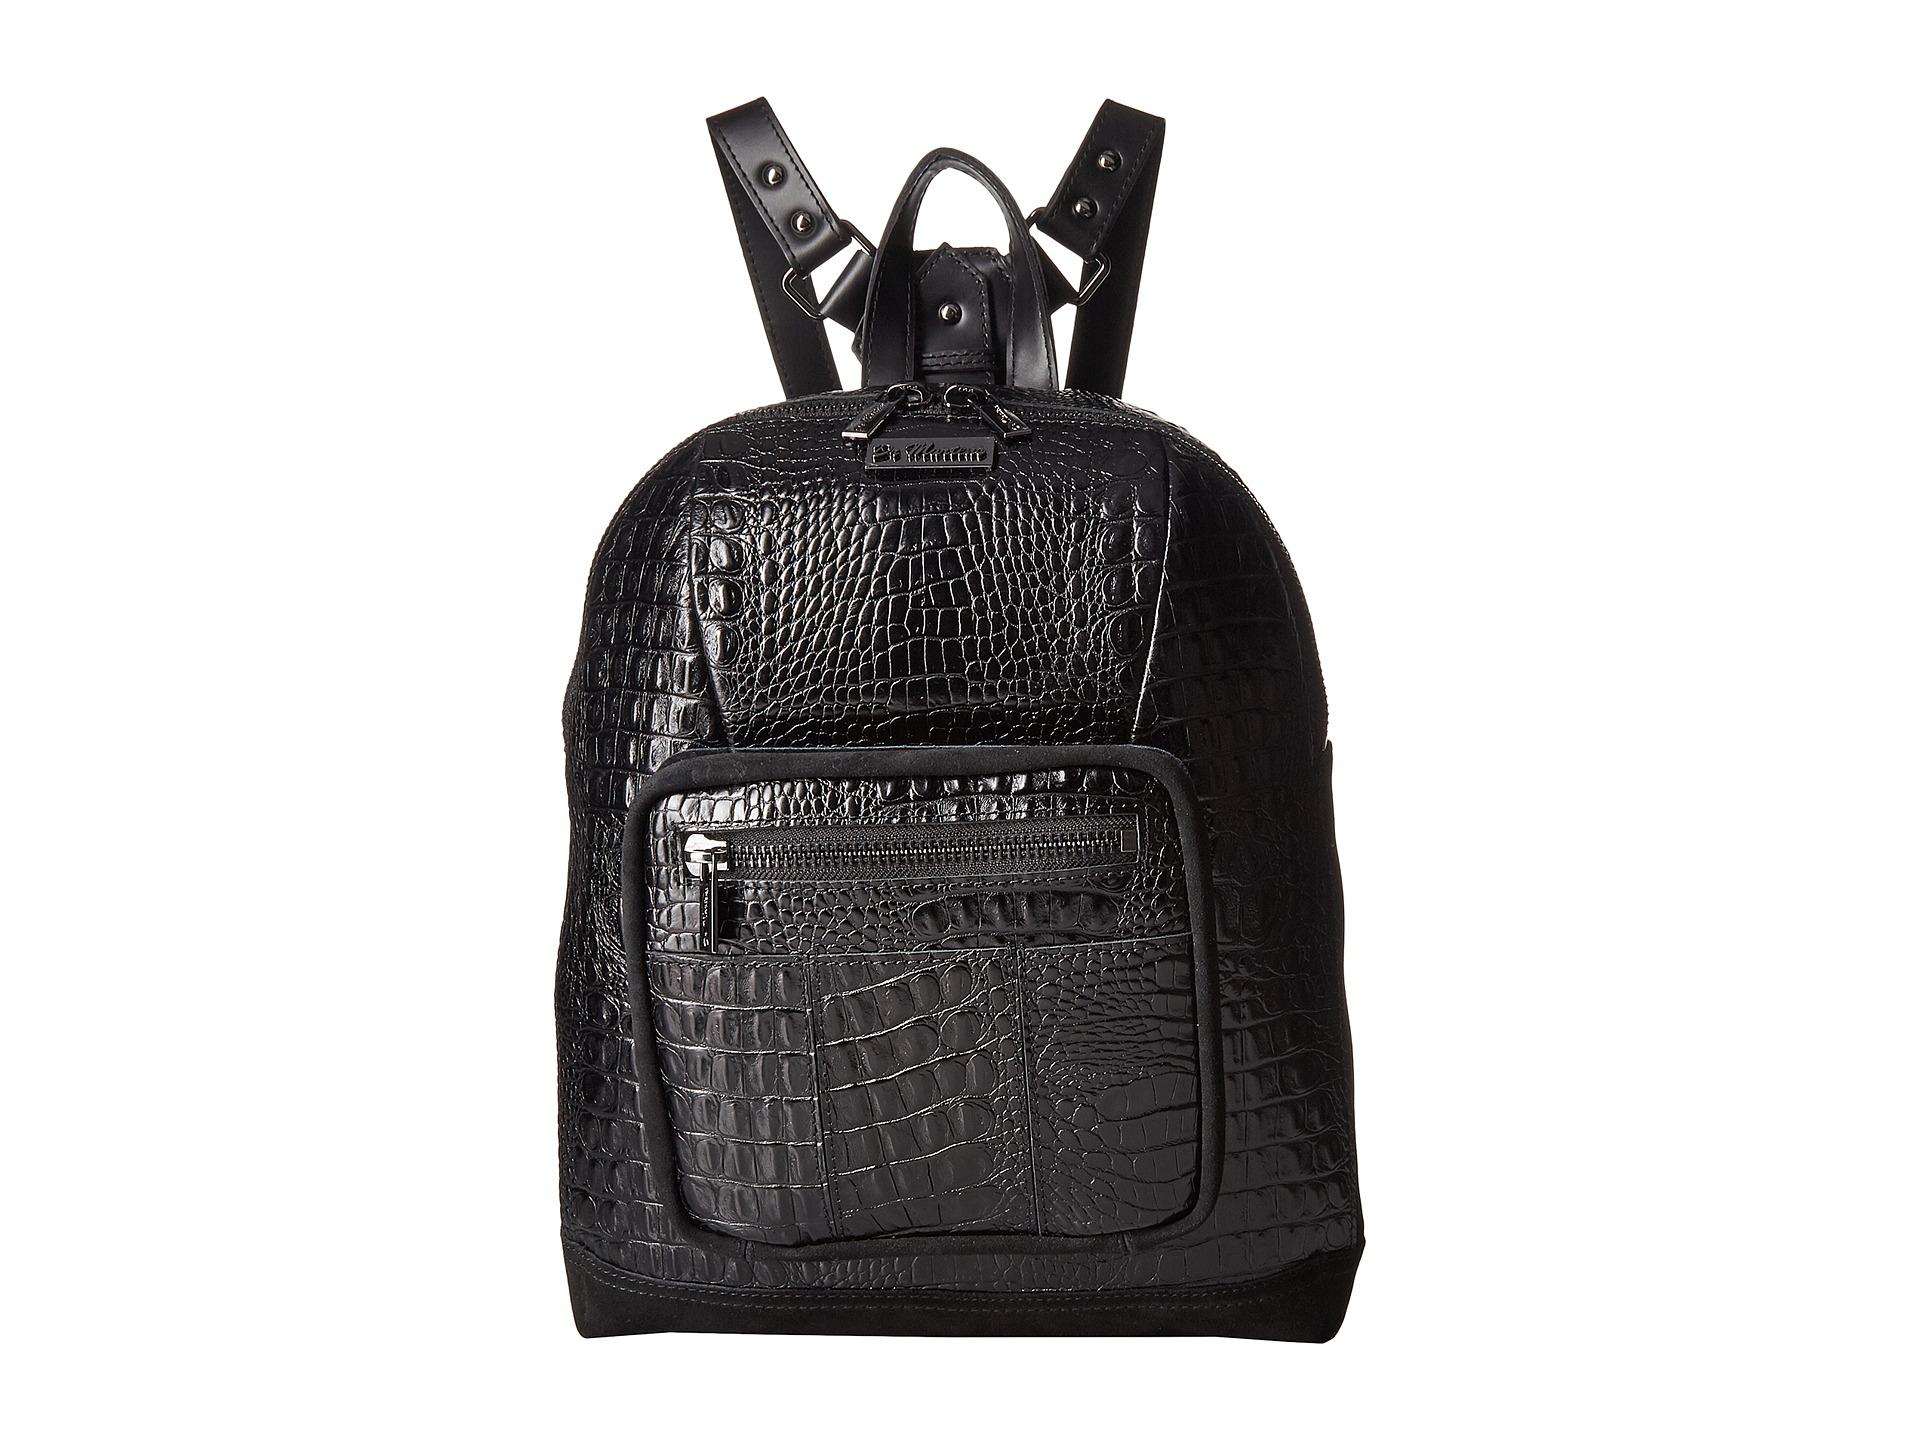 Dr. Martens Leather Lux Small Slouch Backpack in Black for Men - Lyst